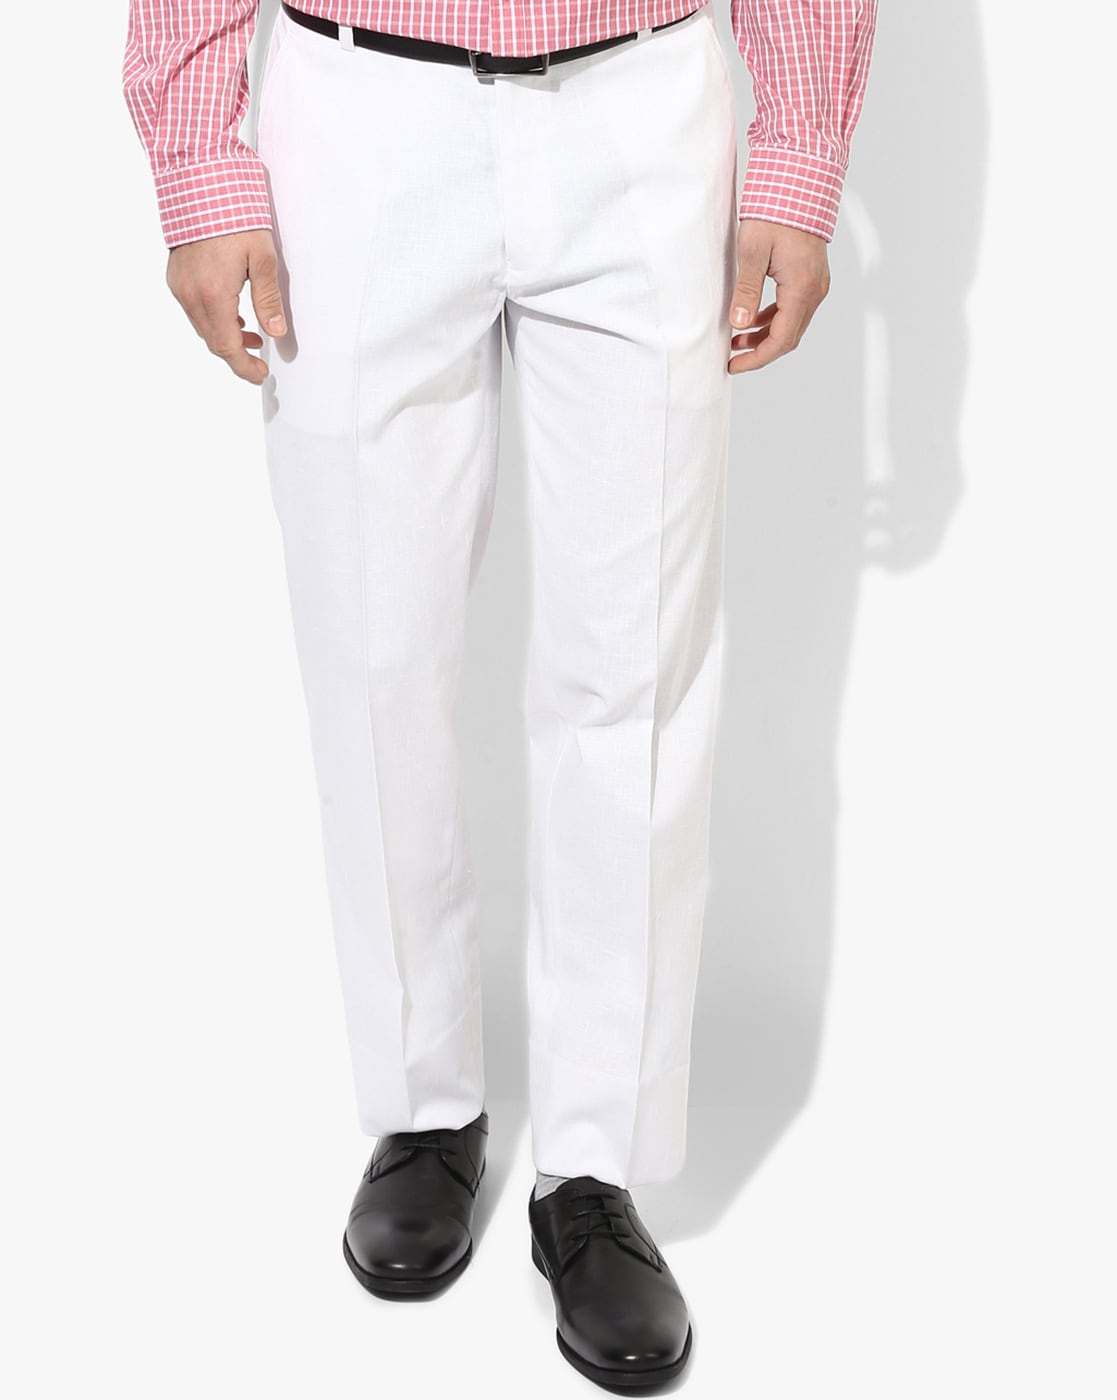 Best White Pants for Men: For Casual to Classic Look | Dapper Confidential